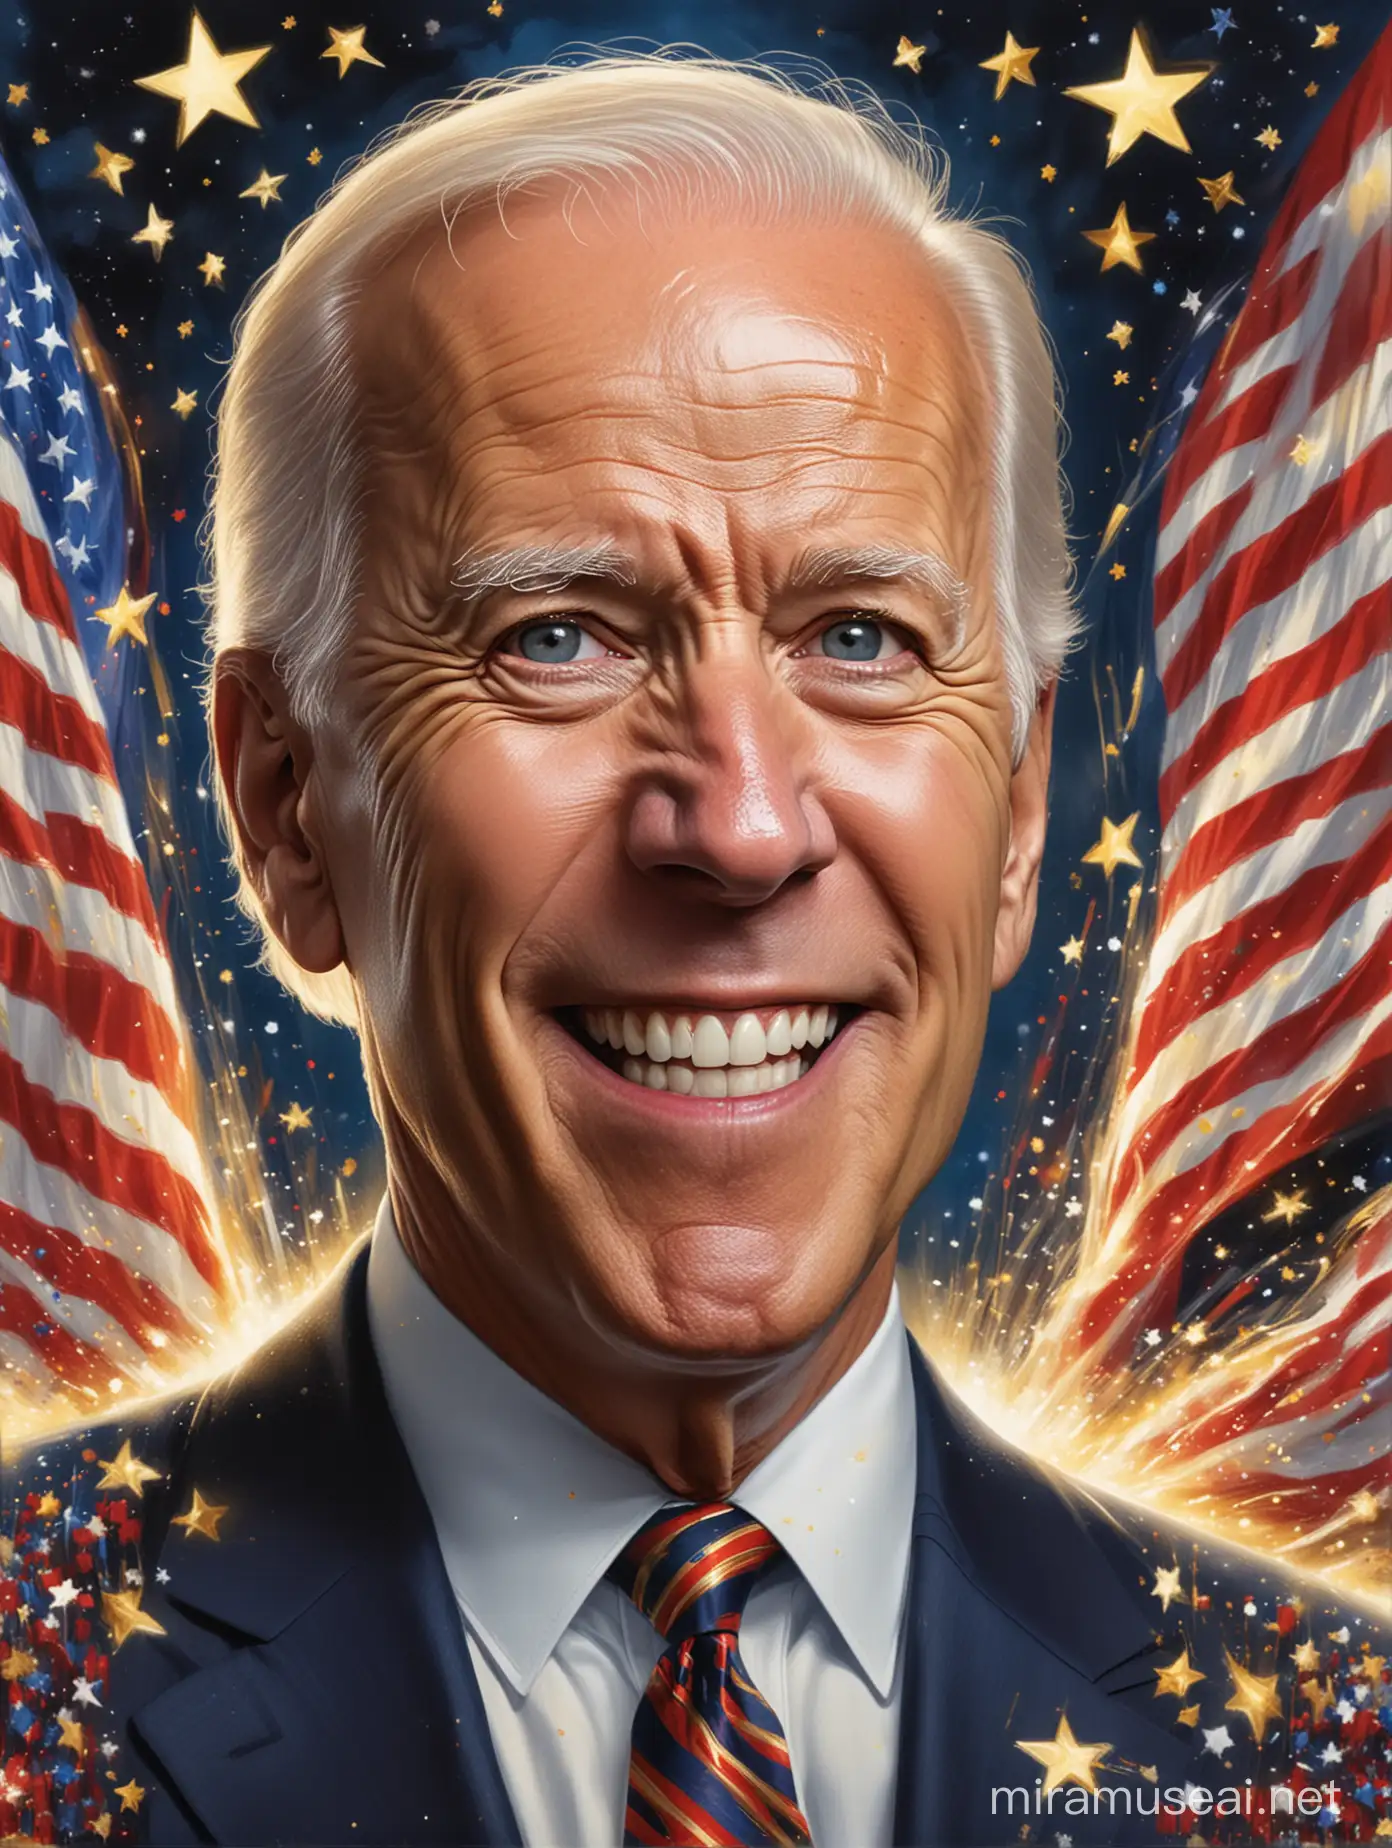 Create a blockbuster movie poster the shows a toothy smiling Joe Biden in his glowing golden U.S. presidency. Add lots of stars, stripes, red, white and blue light beams.